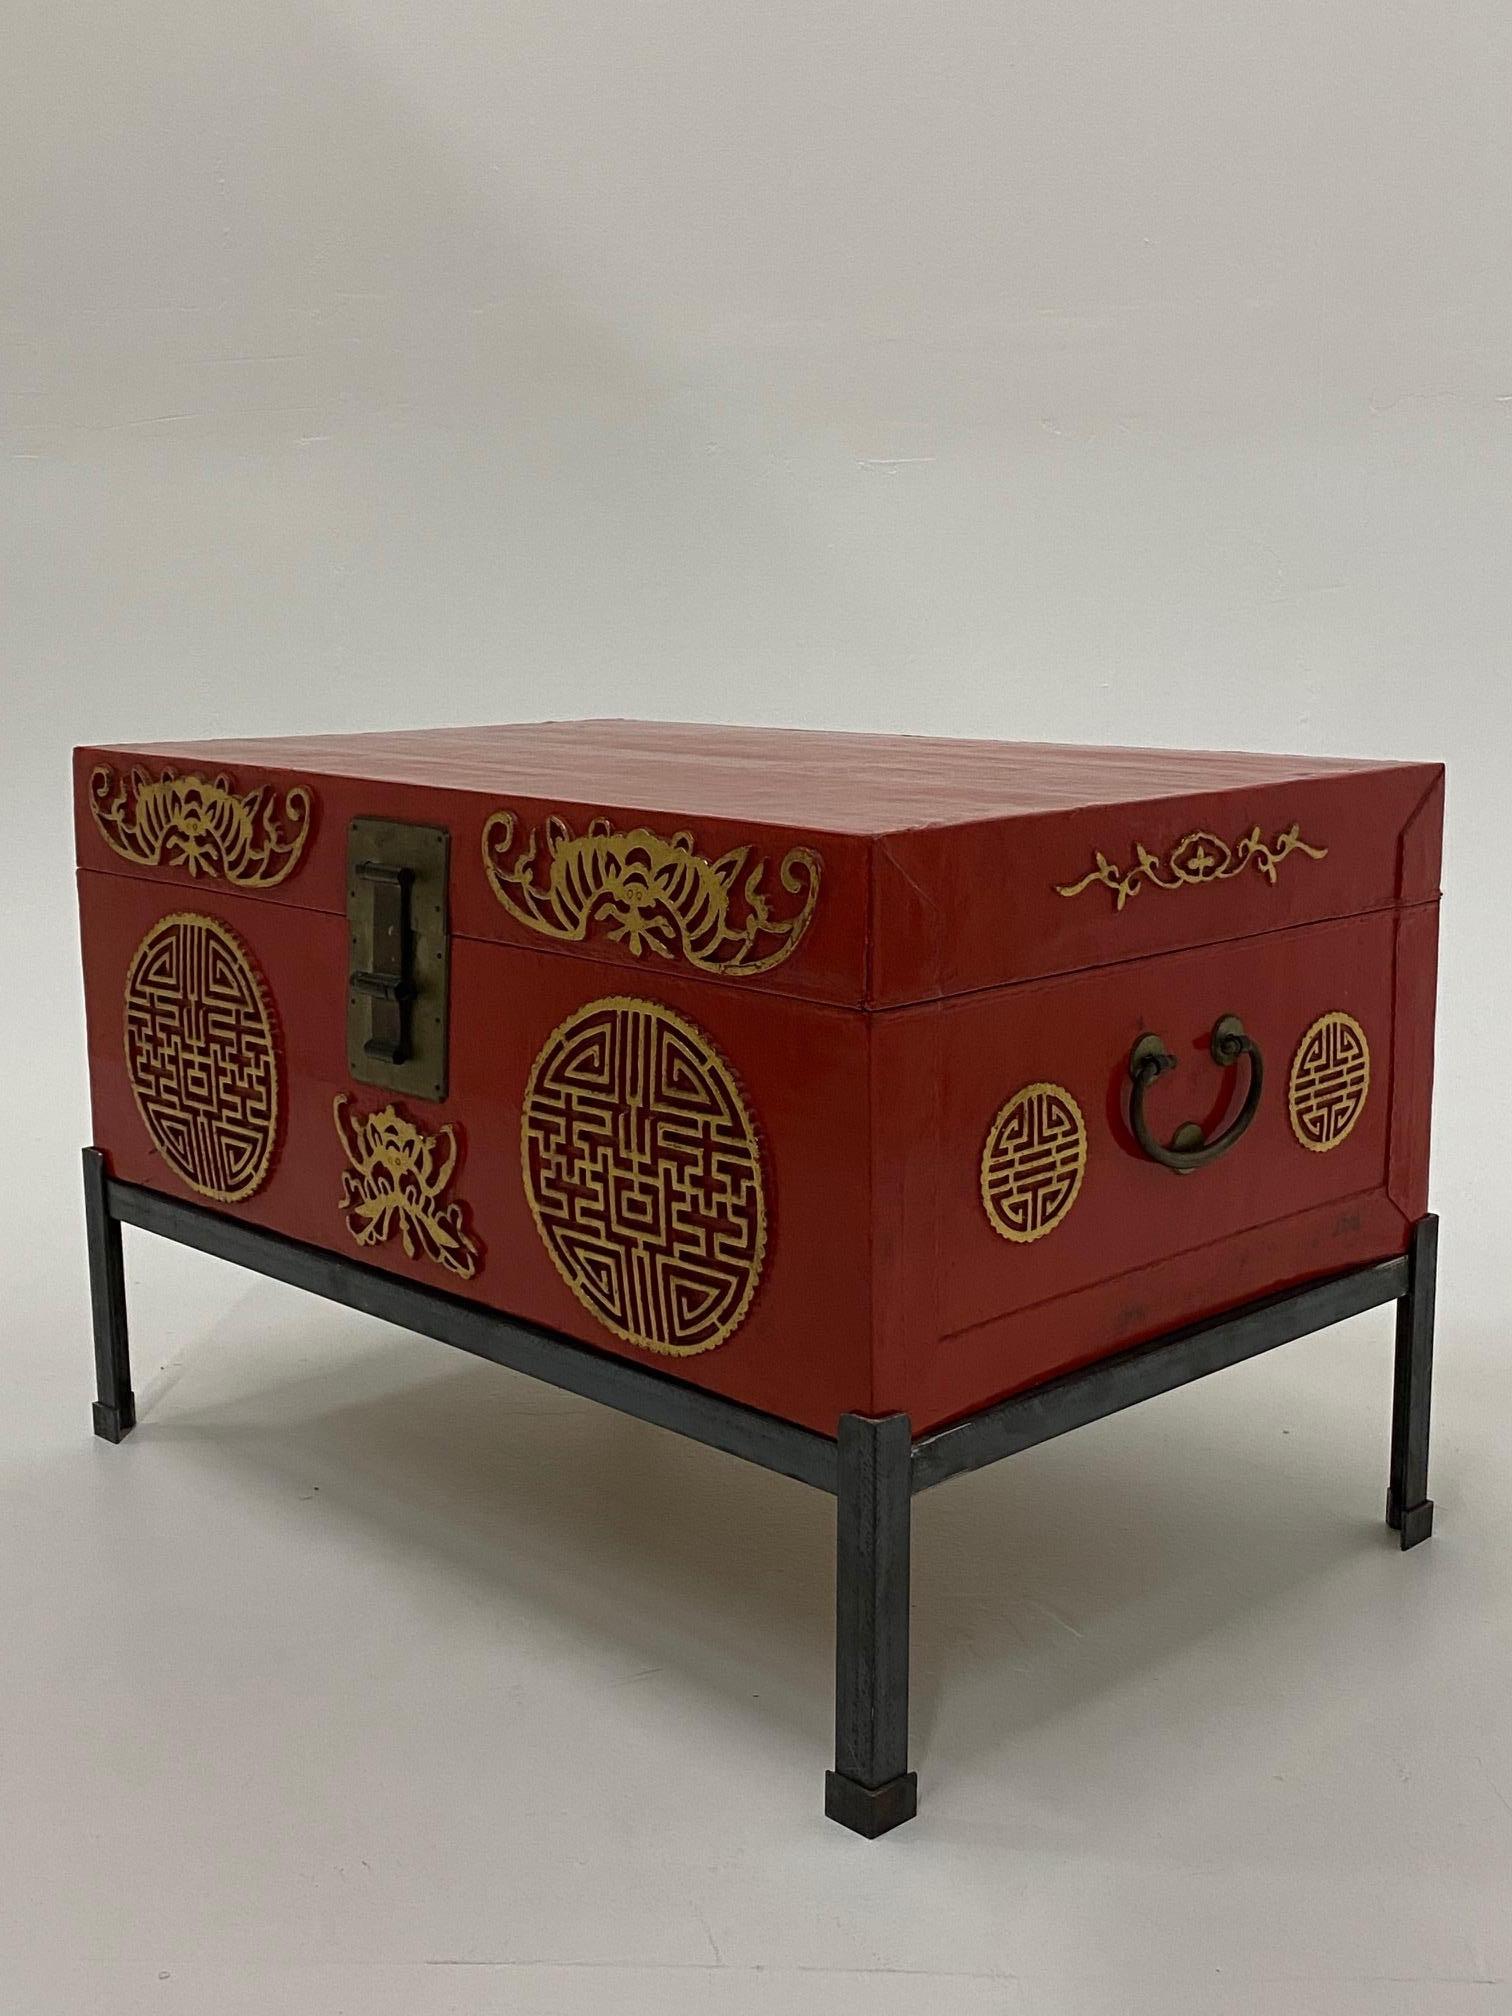 Wonderful Chinese red trunk with raised gold medallions that rests on a custom iron stand.